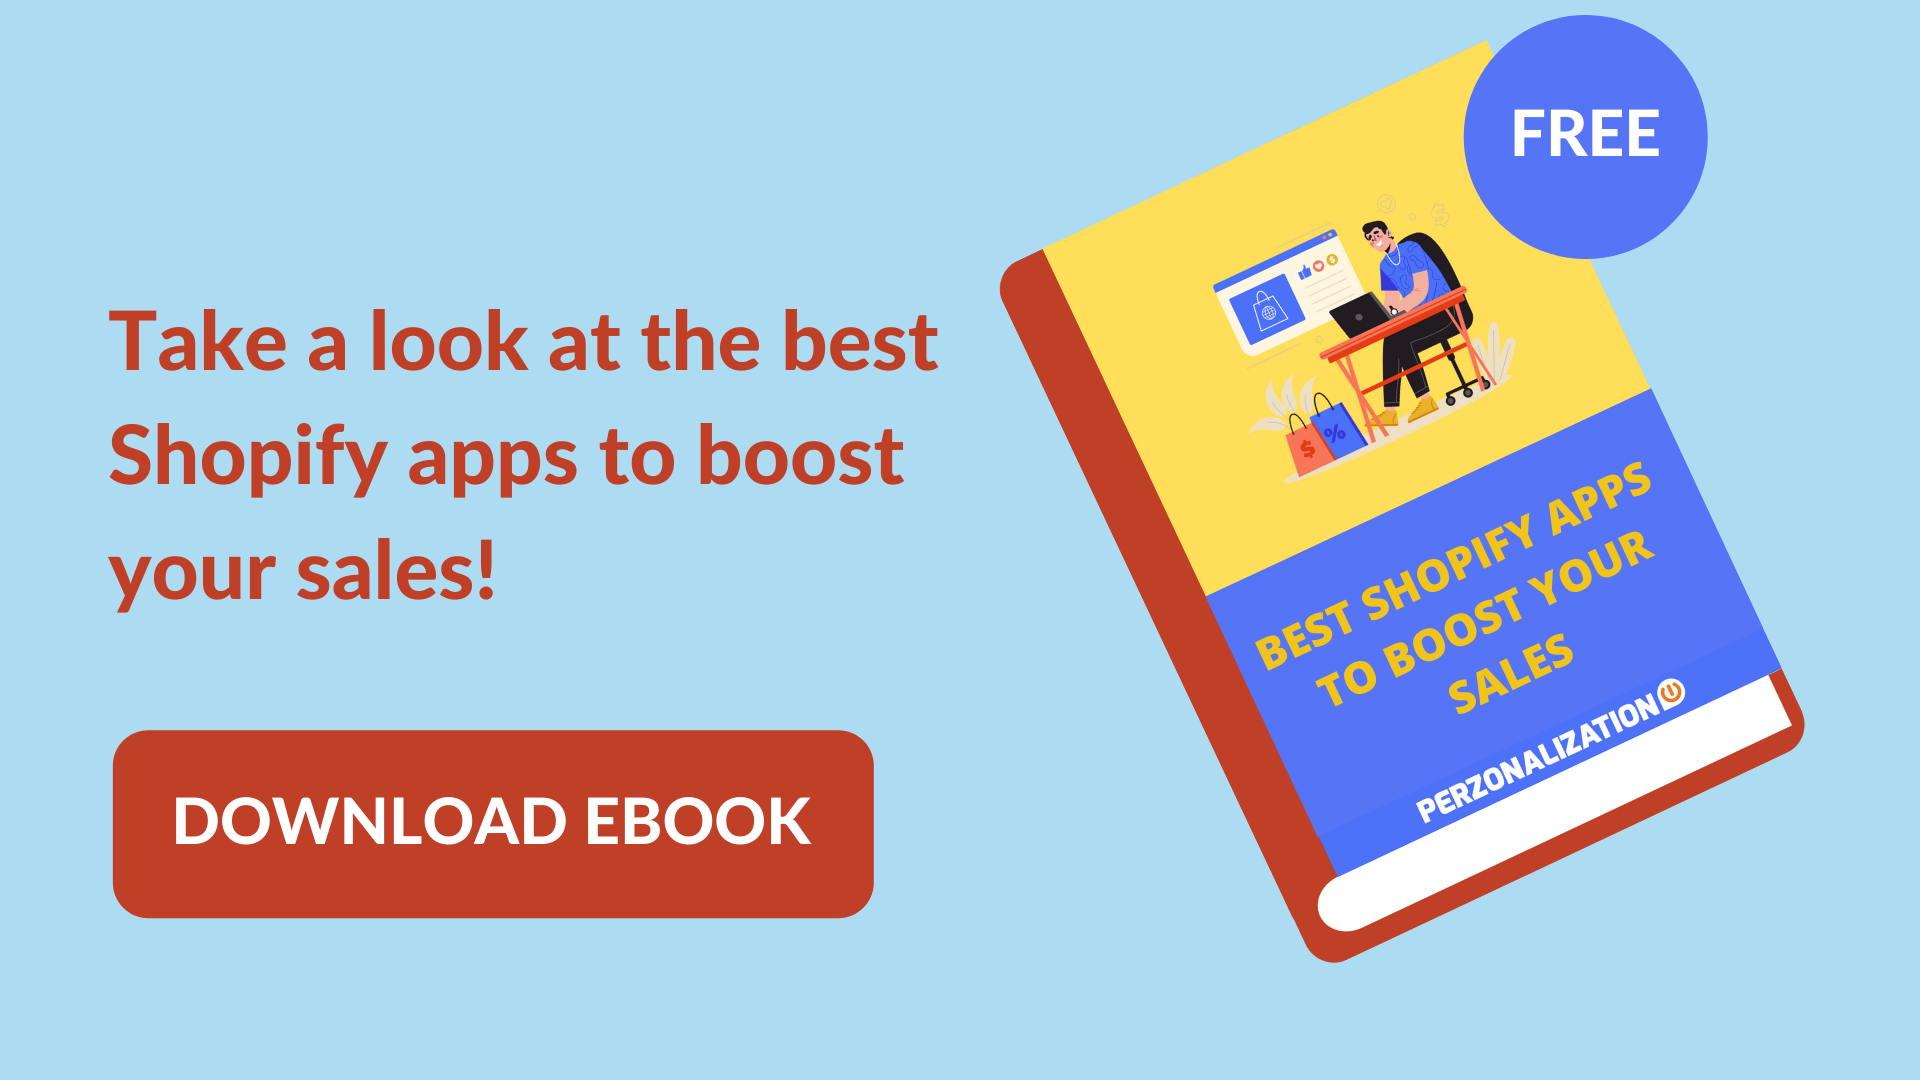 Best Shopify Apps: Free eBook Popup